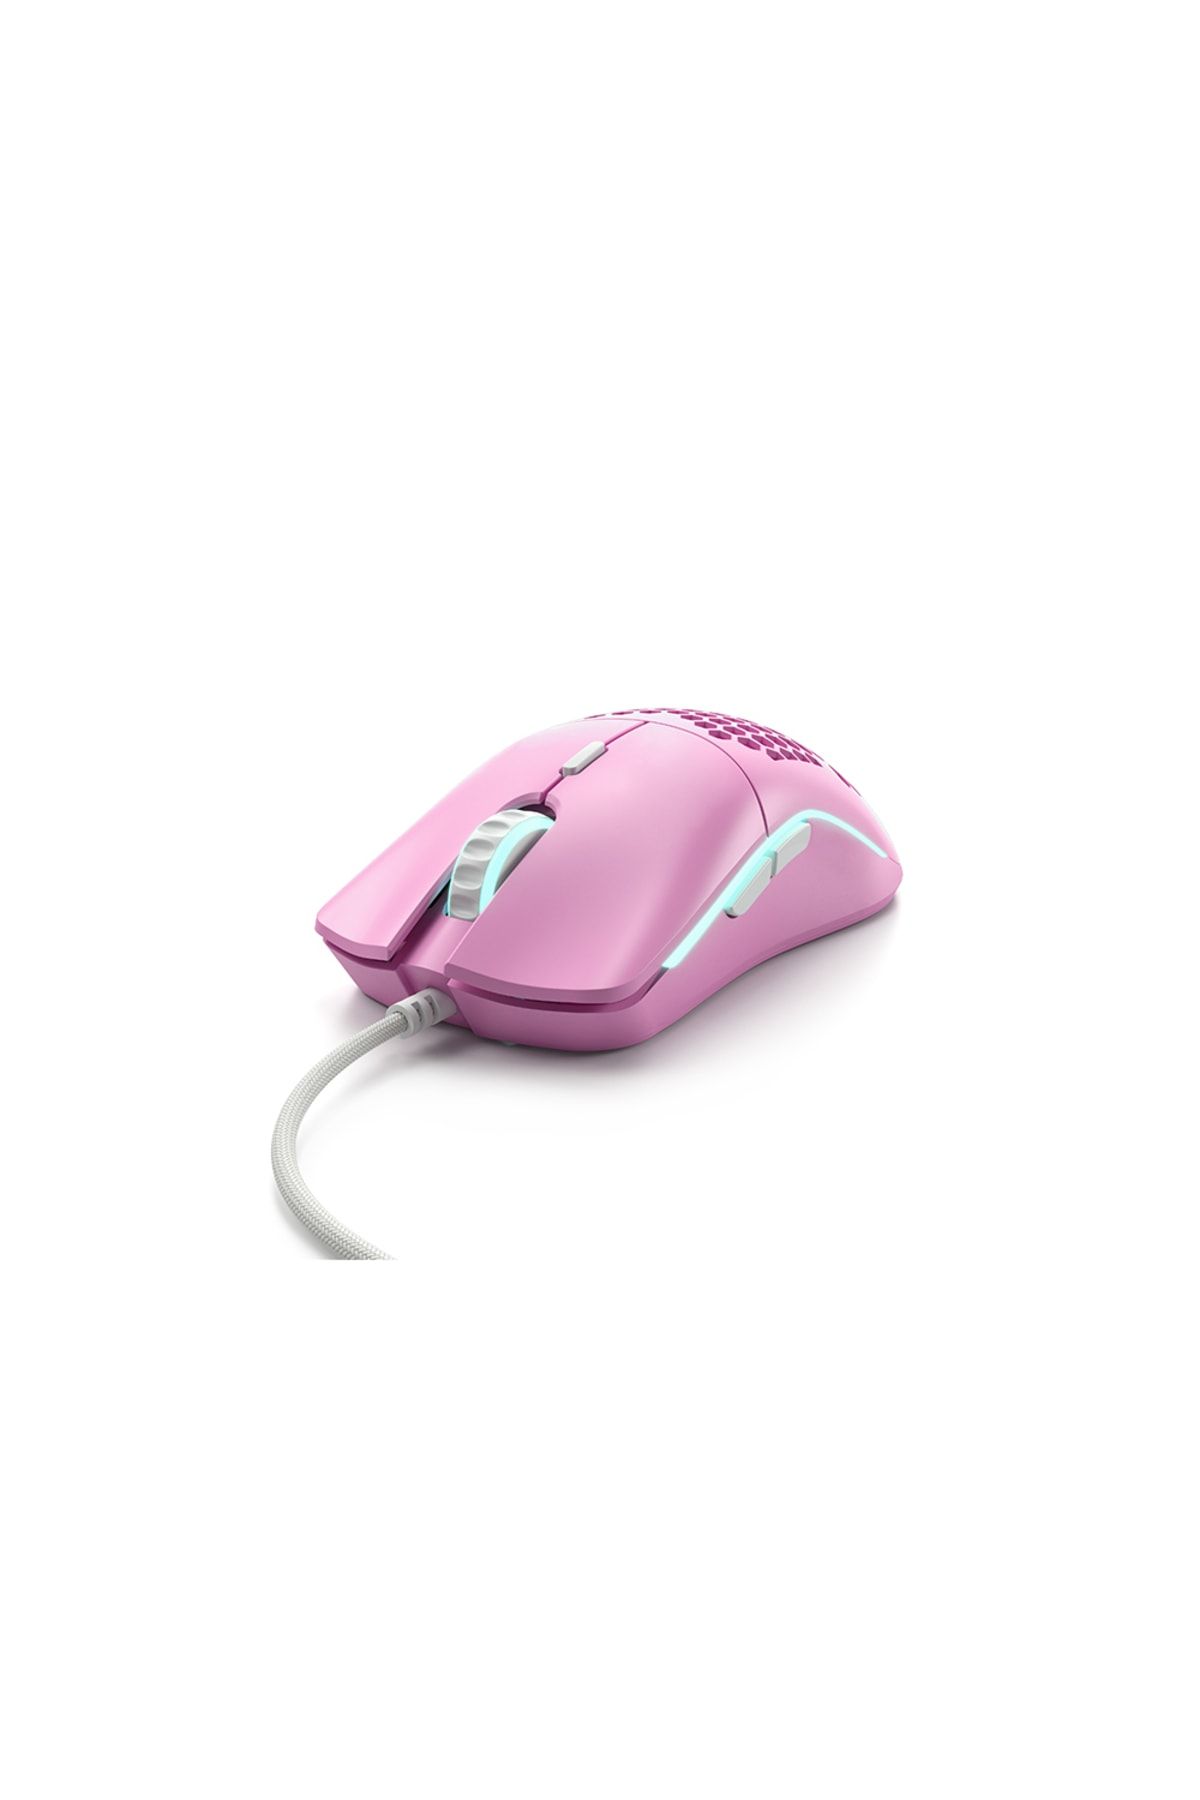 Glorious Model O Forge Mouse - Pembe